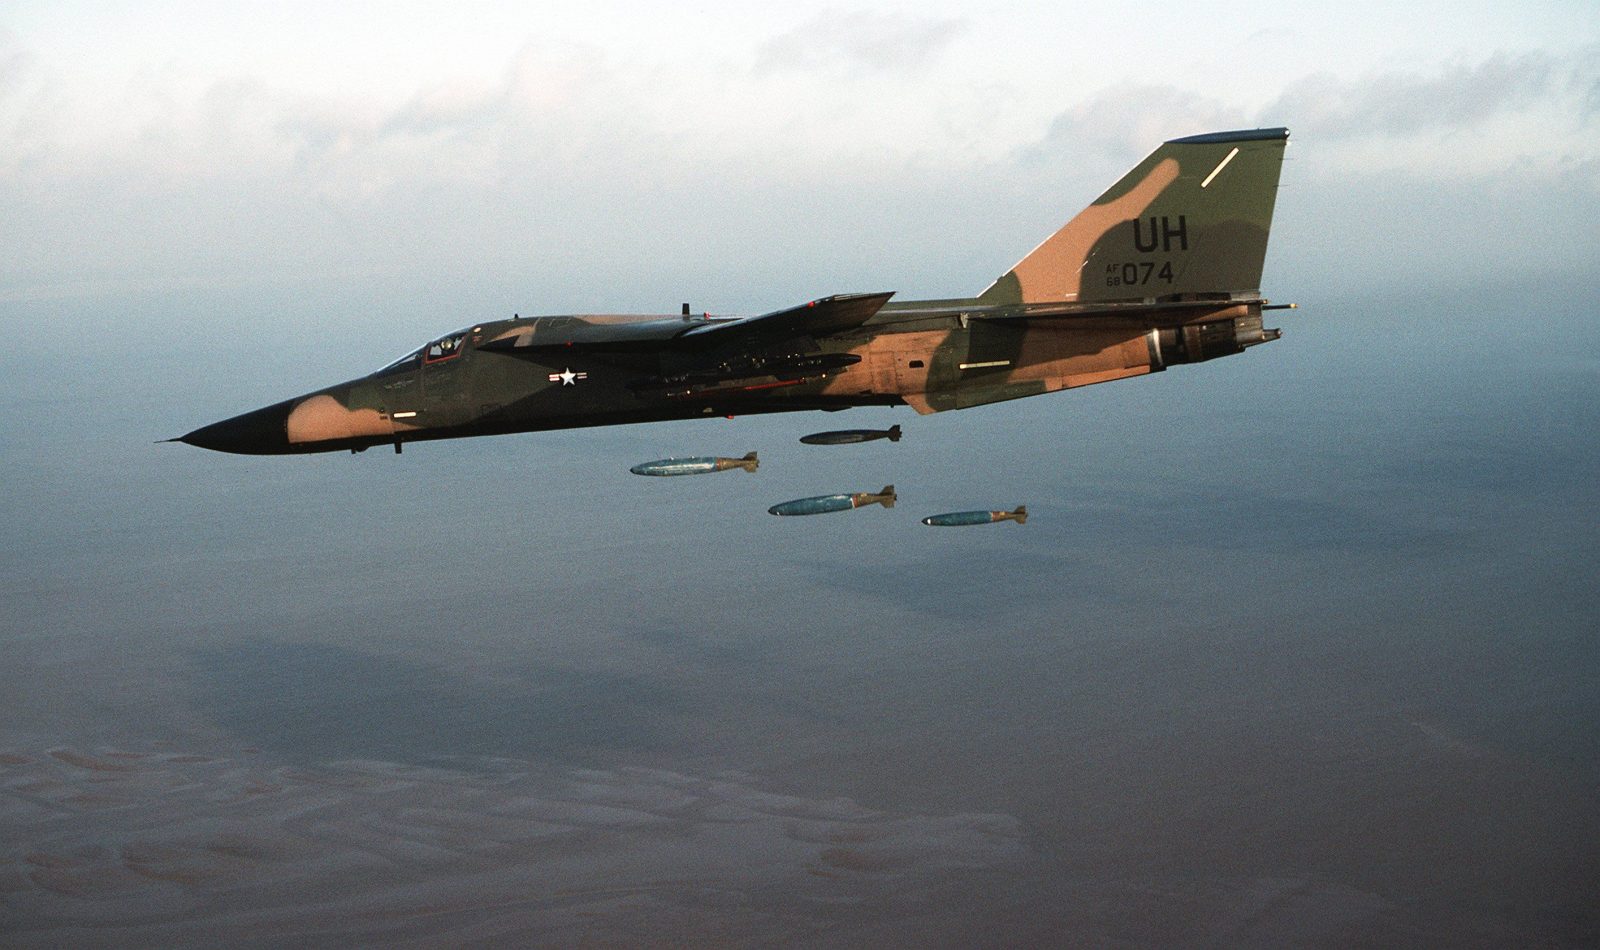 General Dynamics F-111 Aardvark: The Interdictor & Tactical Attack Fighter of USAF (United States Air Force)